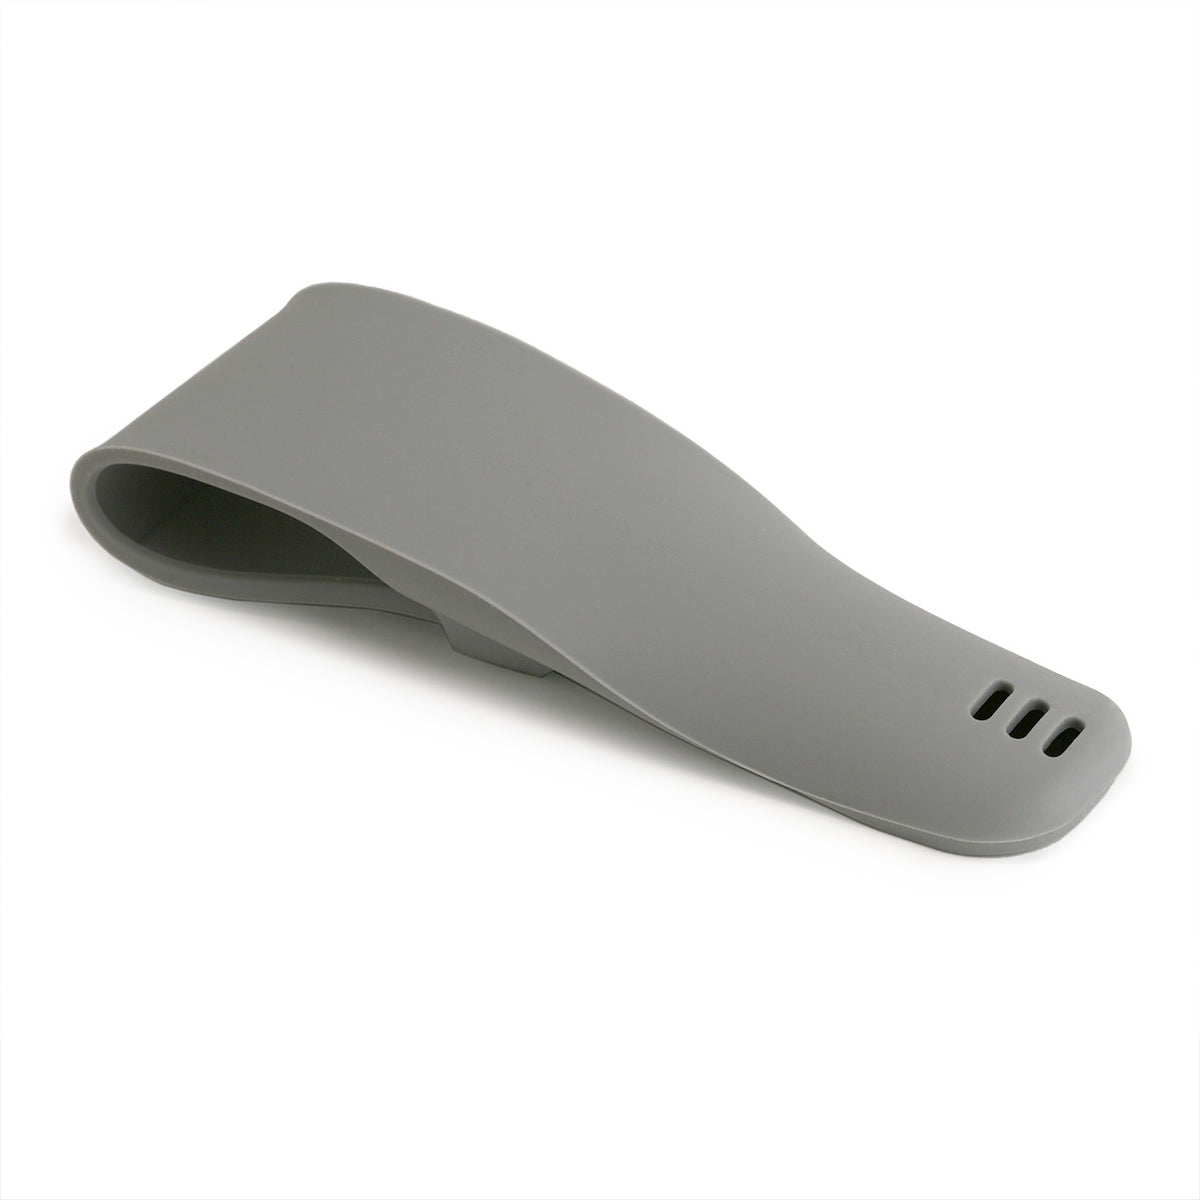 Back view of the light grey silicone razor case showing the three airflow vents at the base